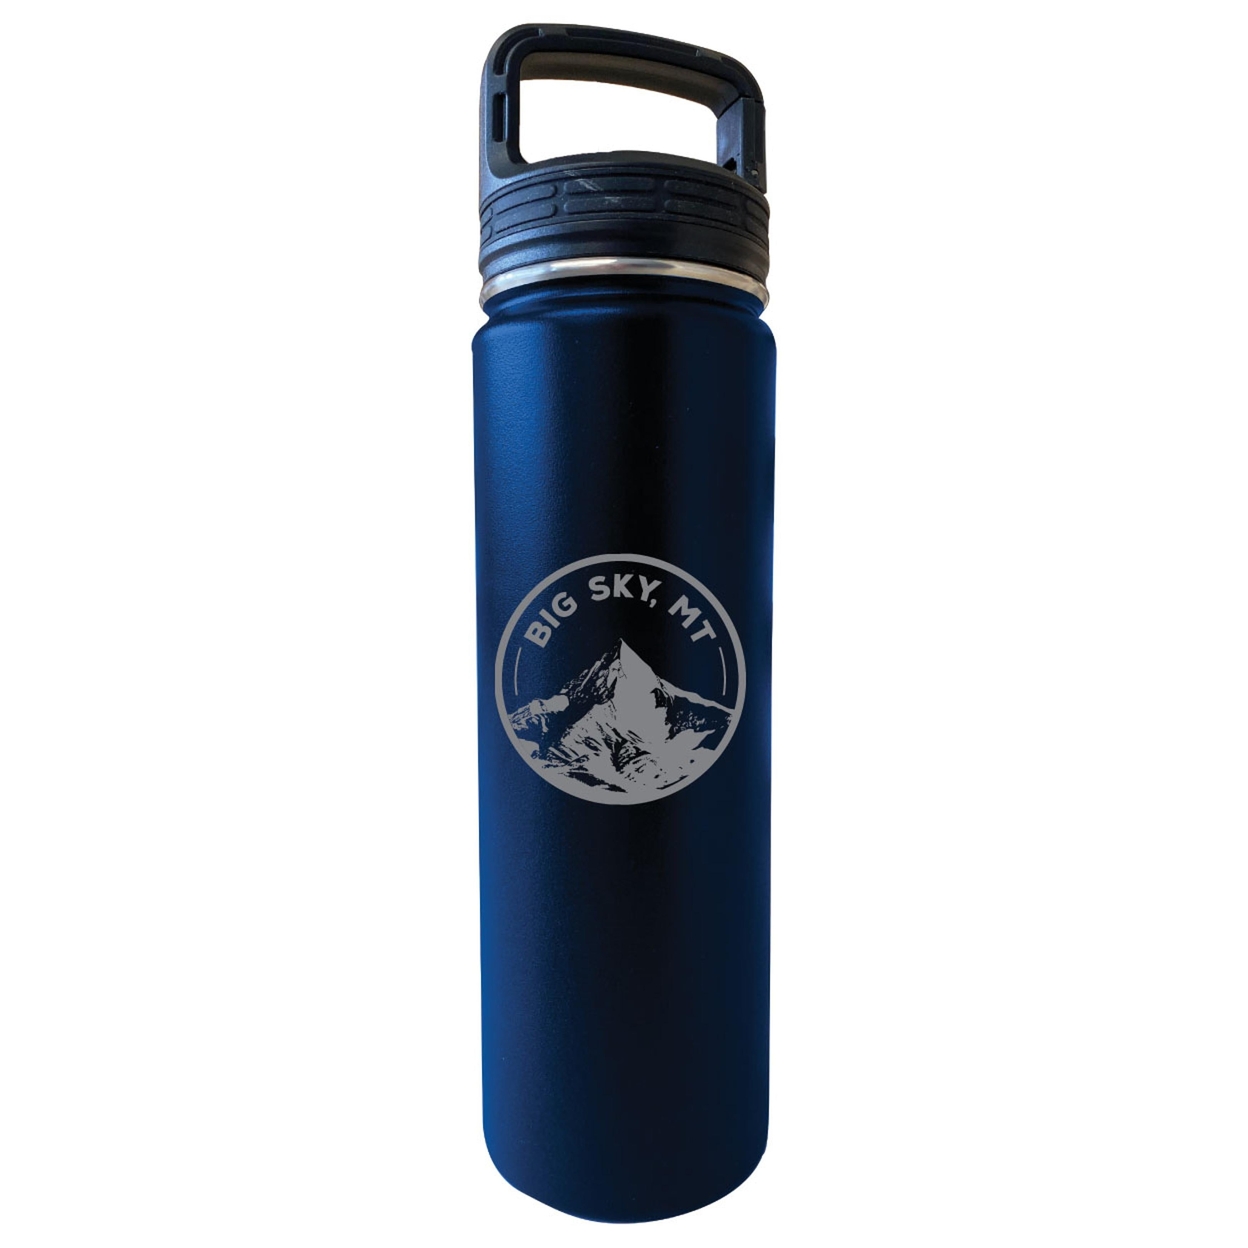 Big Sky Montana Souvenir 32 Oz Engraved Insulated Stainless Steel Tumbler - Navy,,2-Pack